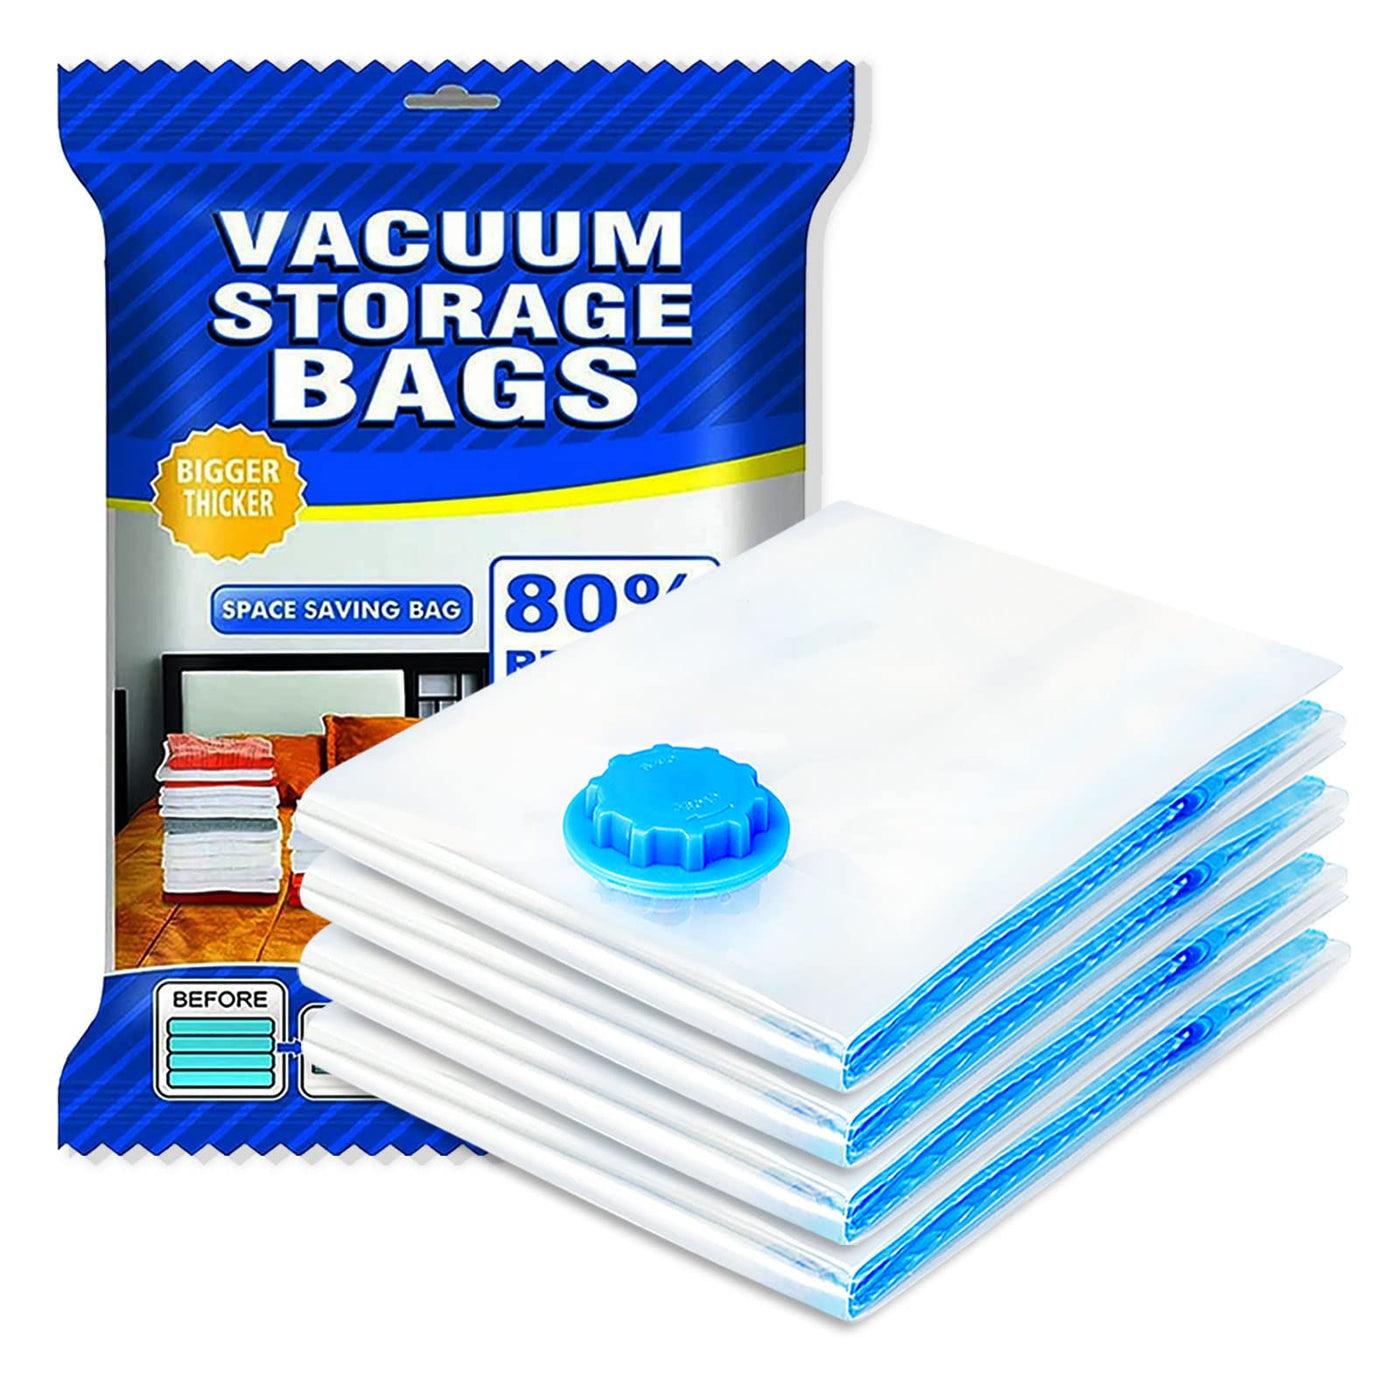 Vacuum Storage Bags, Space Saver Bag, Vacume Pack Storage Bag for Clothes  Blankets Travel Storage,Reusable Bags Double Zip Seal